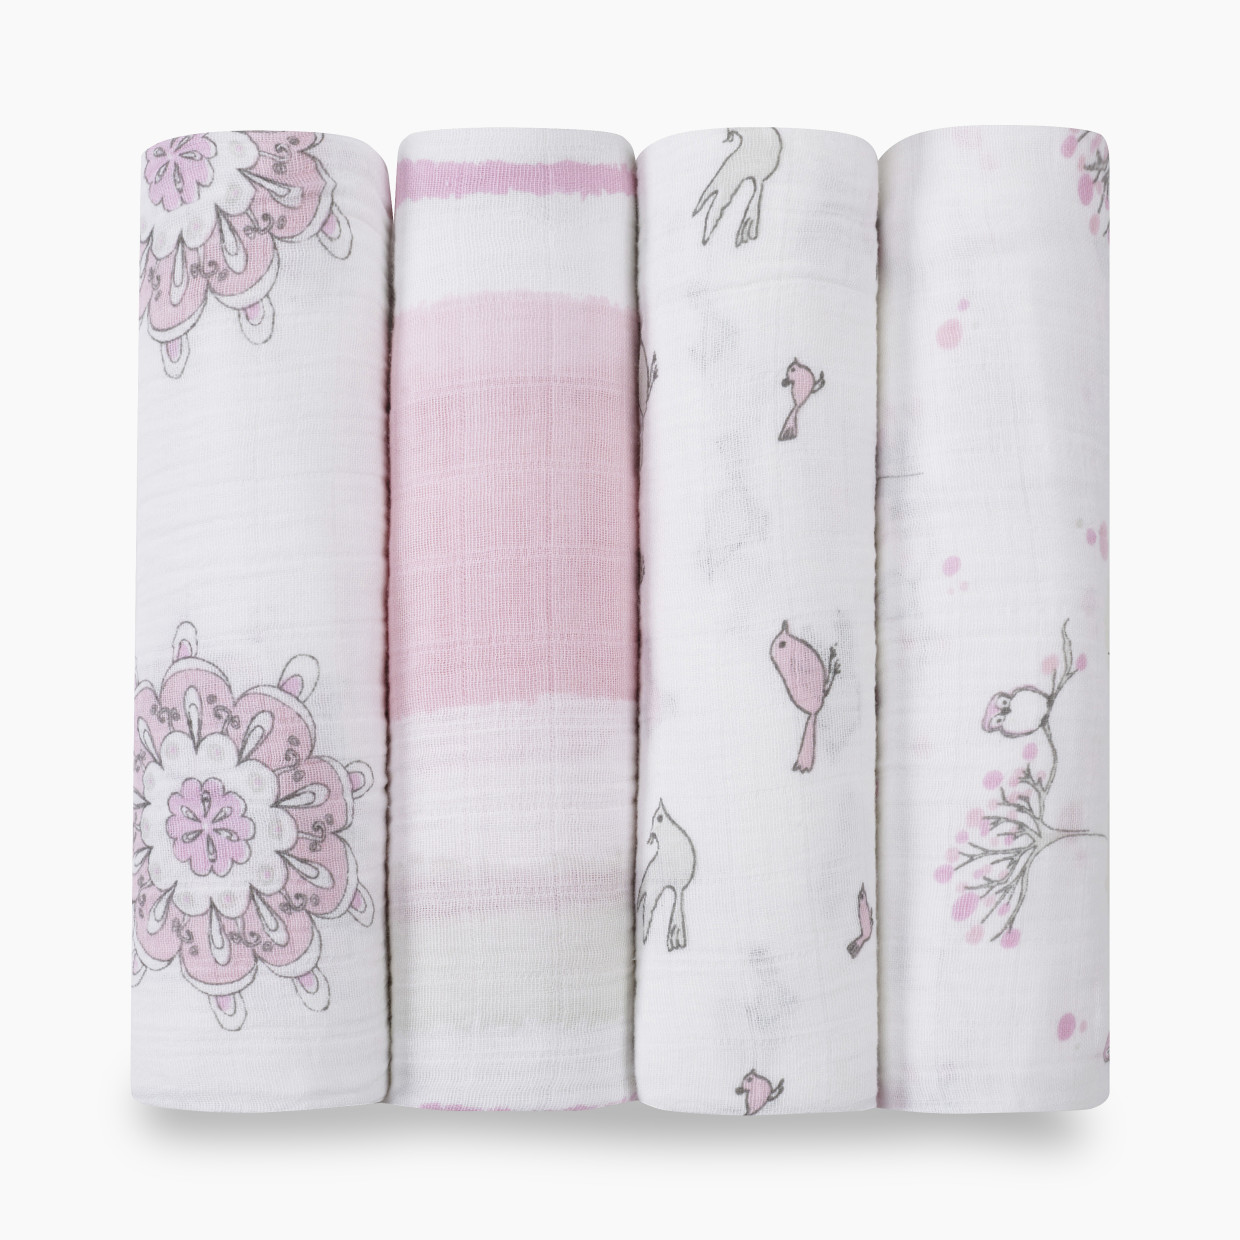 Aden + Anais Cotton Muslin Swaddle 4-Pack - For The Birds.